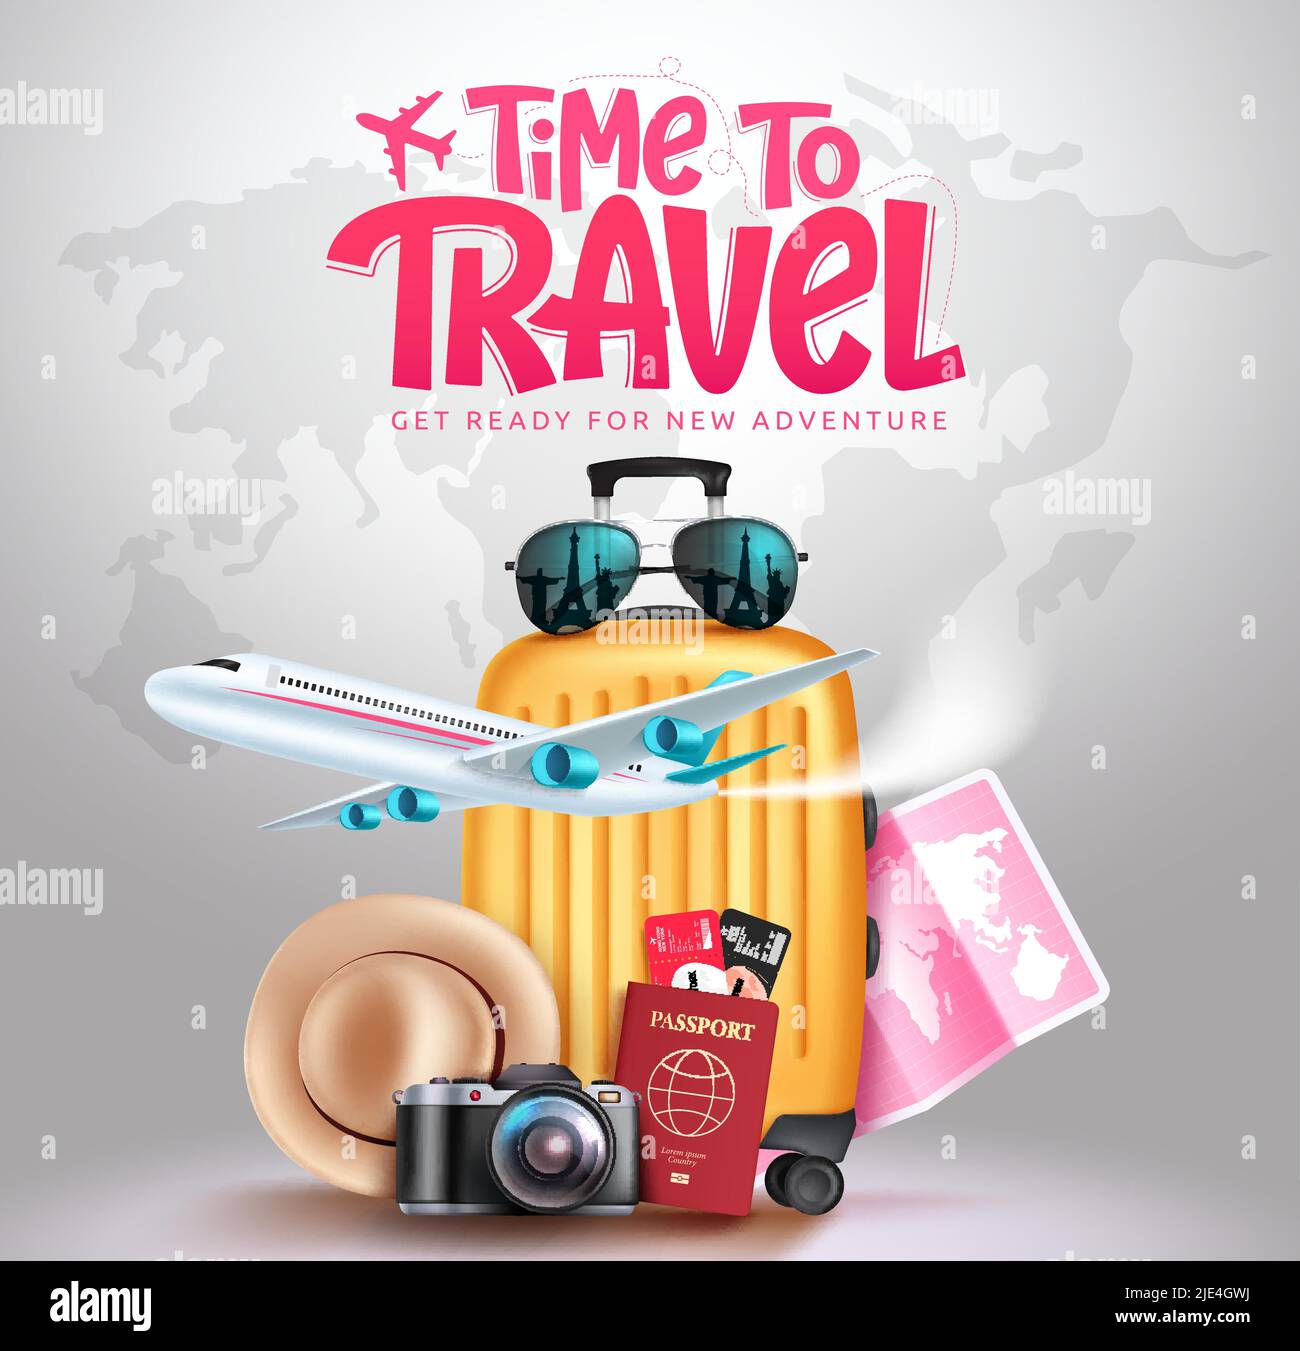 Travel time vector concept design. Time to travel text in map background with luggage, airplane and passport tour elements for fun and enjoy. Stock Vector